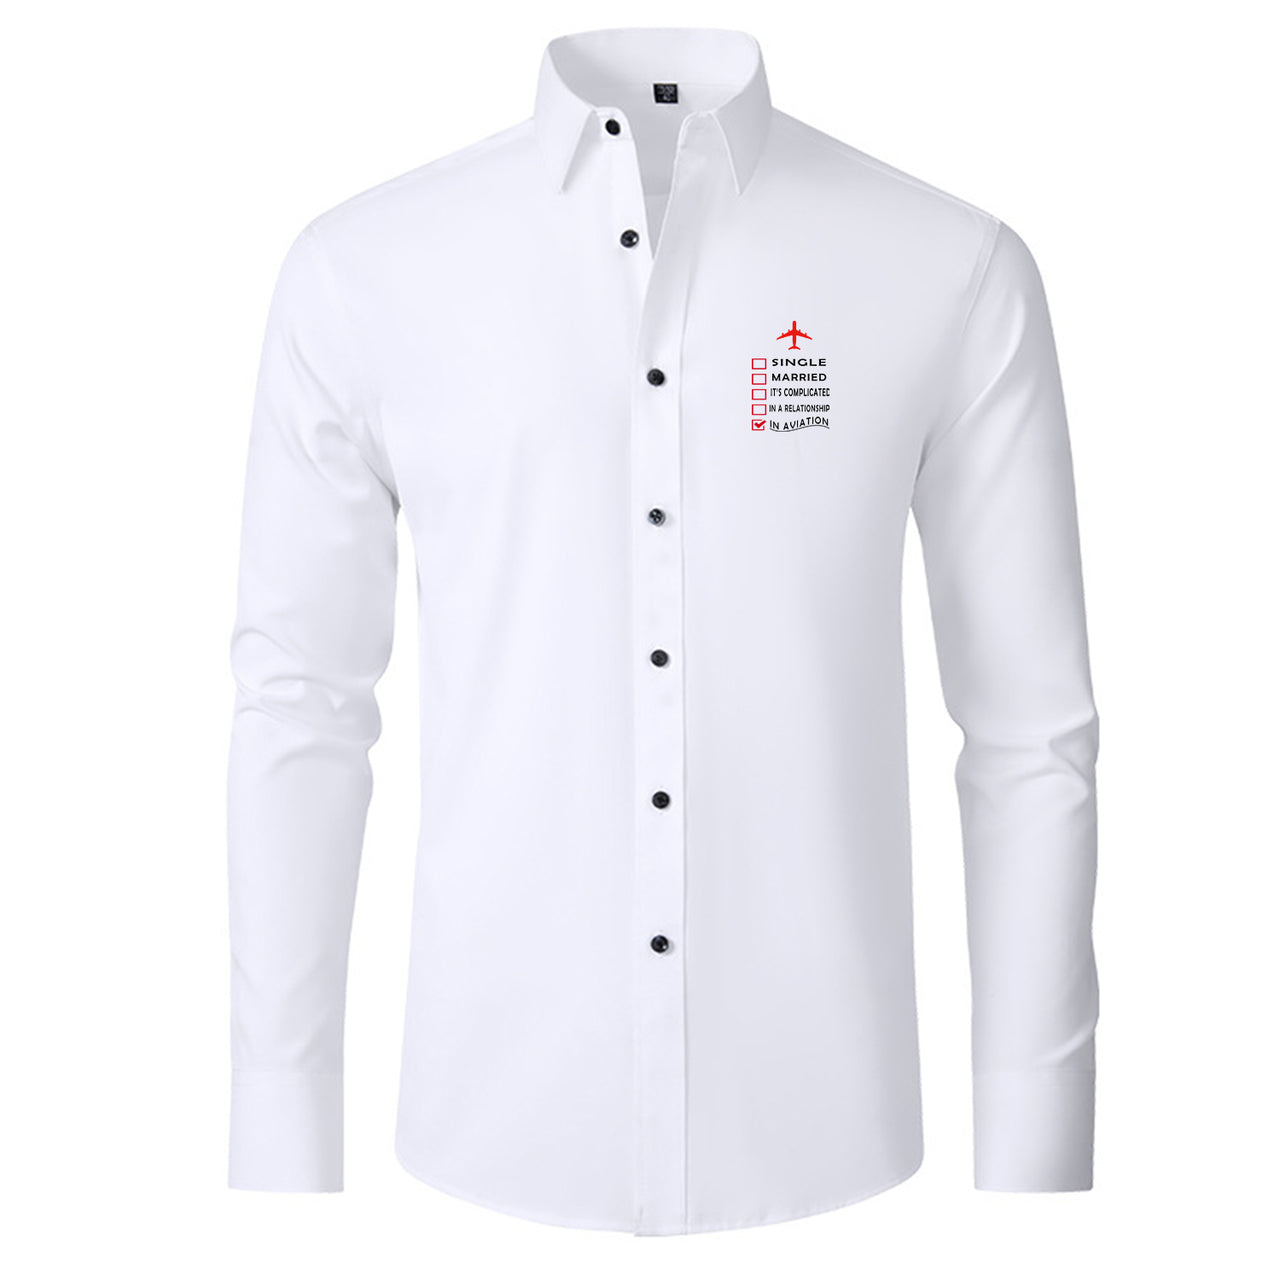 In Aviation Designed Long Sleeve Shirts